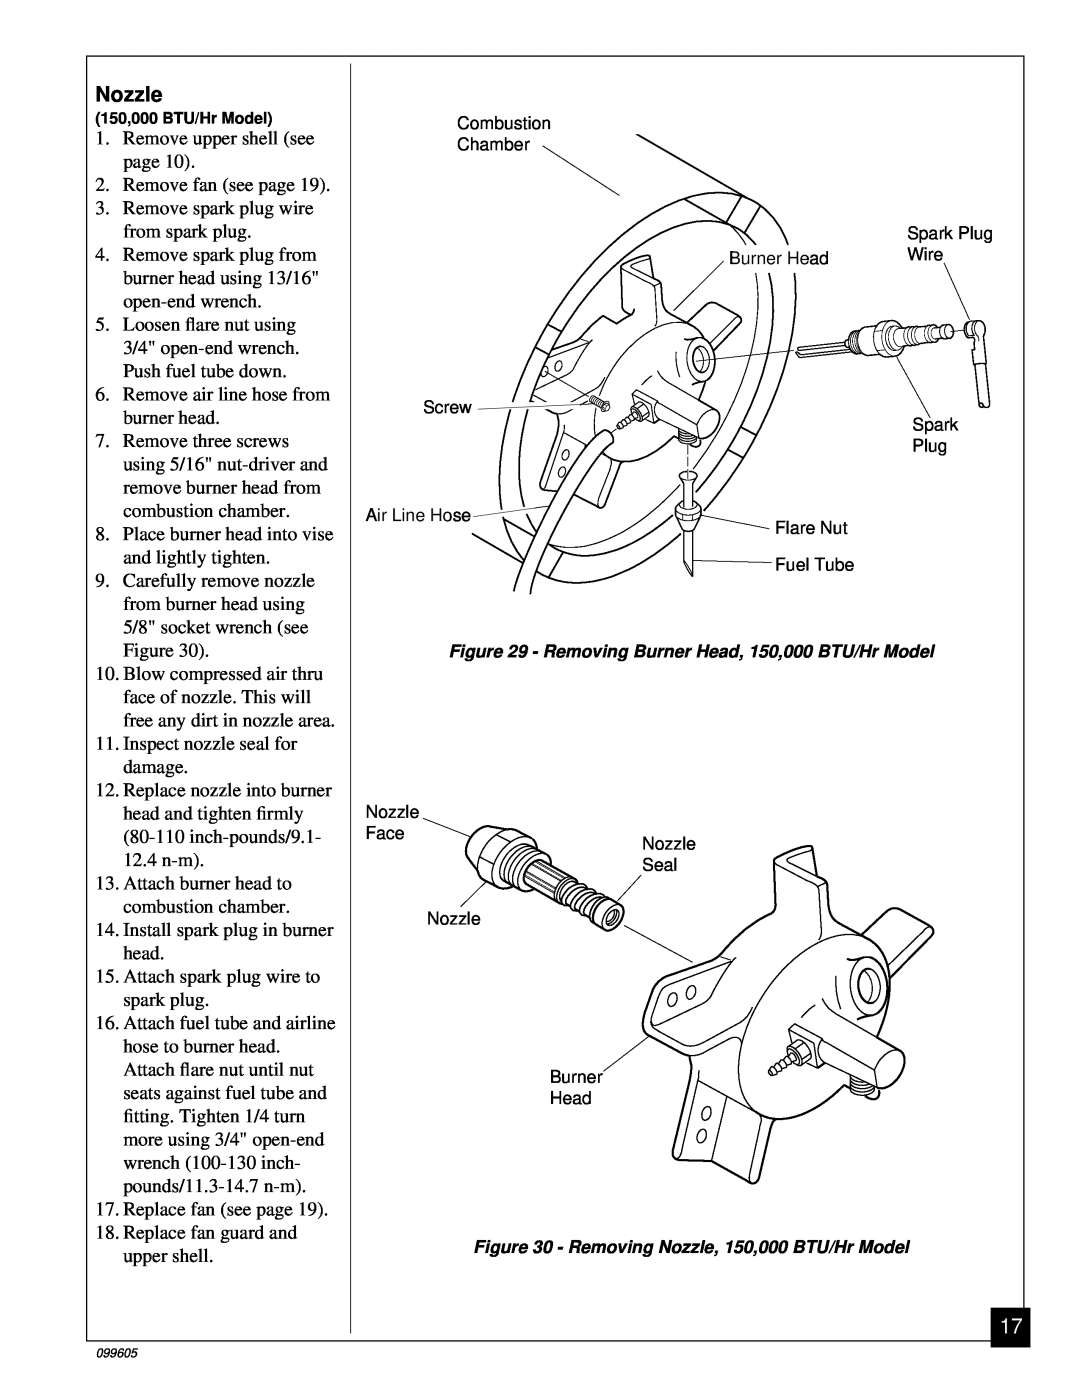 Desa H.S.I. Series owner manual Nozzle, Remove upper shell see page 